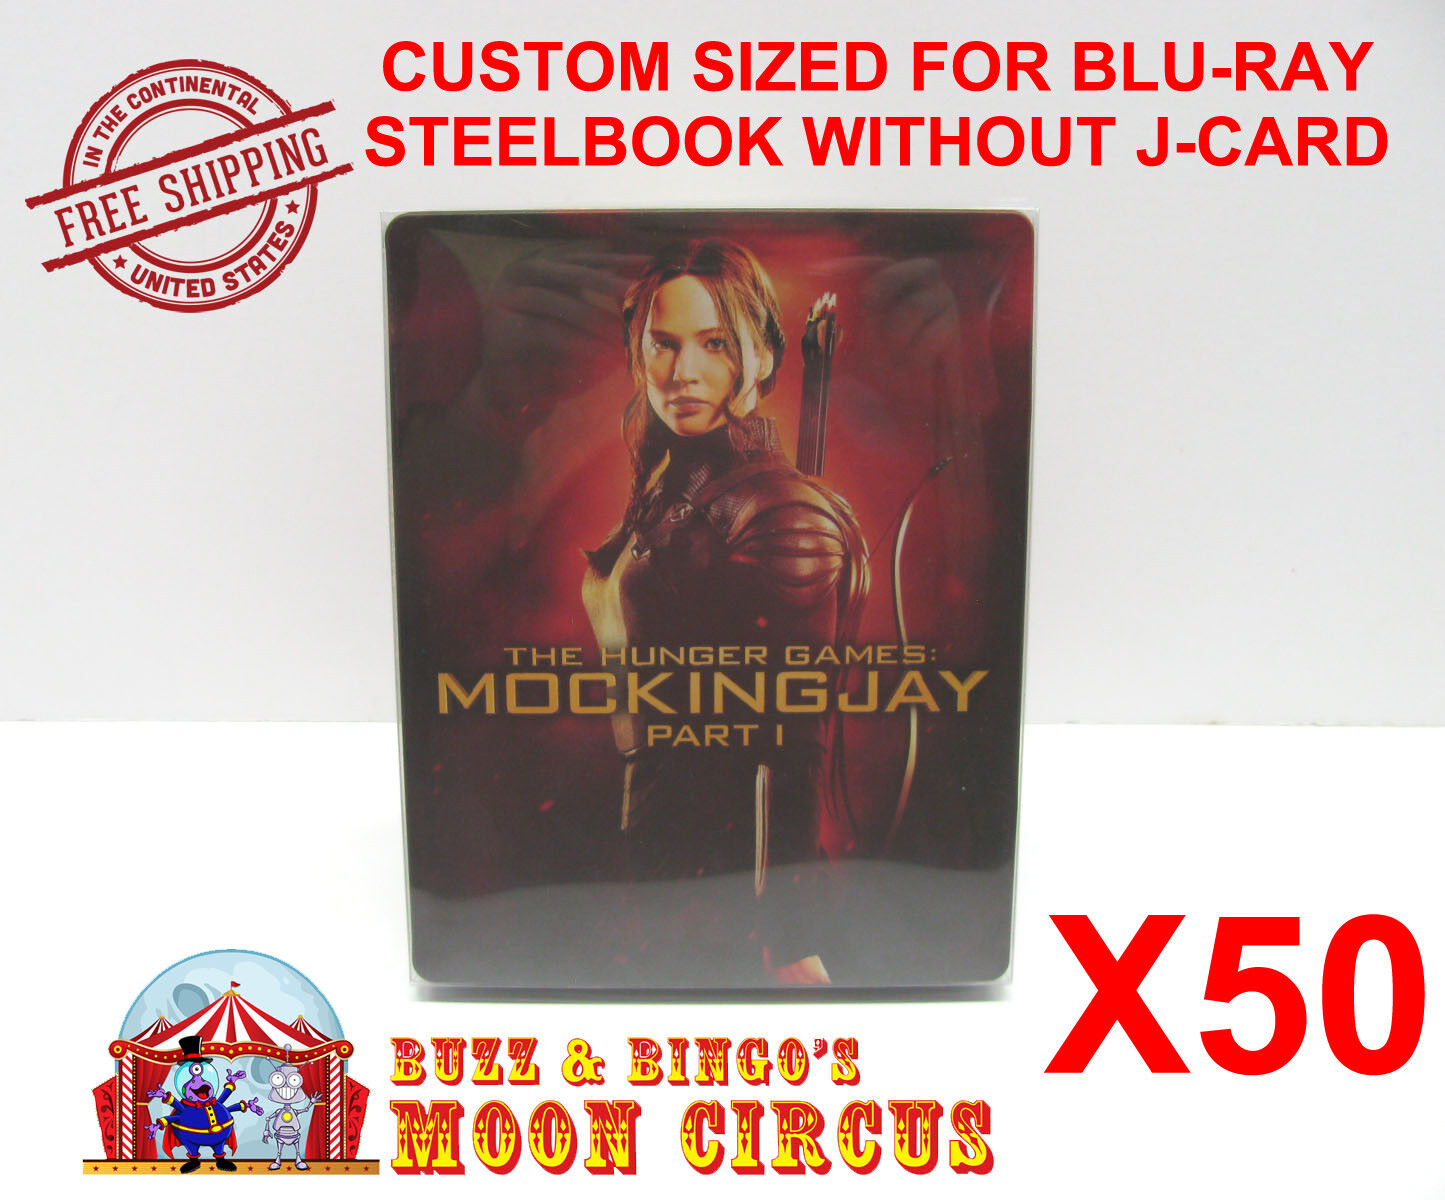 50x BLU-RAY STEELBOOK NO J-CARD (SIZE BR4) - CLEAR PLASTIC BOX PROTECTORS SLEEVE Dr. Retro Does Not Apply